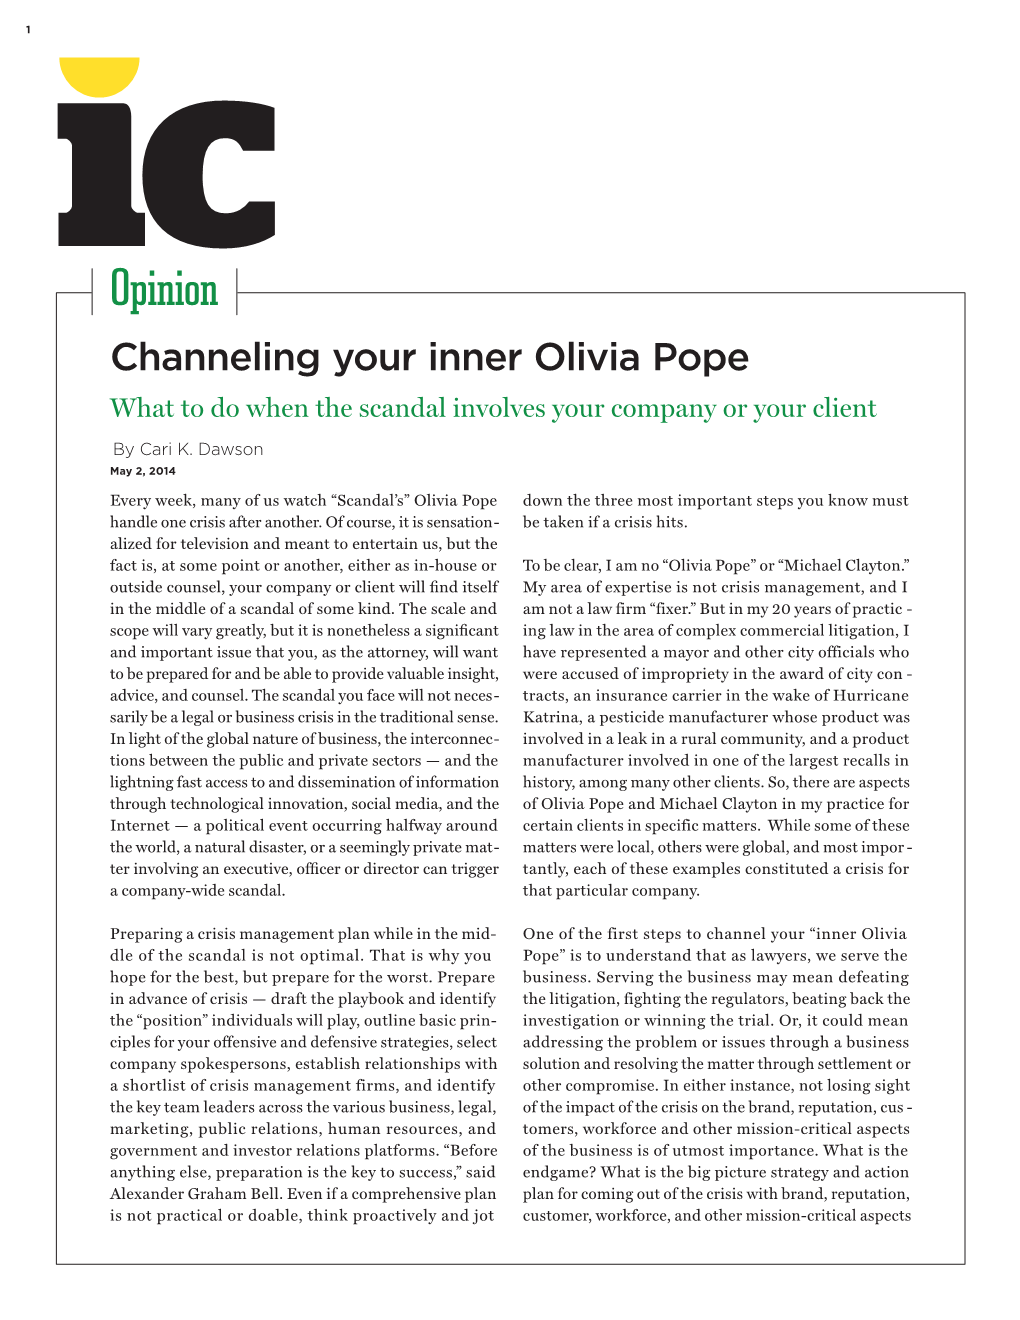 Opinion Channeling Your Inner Olivia Pope What to Do When the Scandal Involves Your Company Or Your Client by Cari K